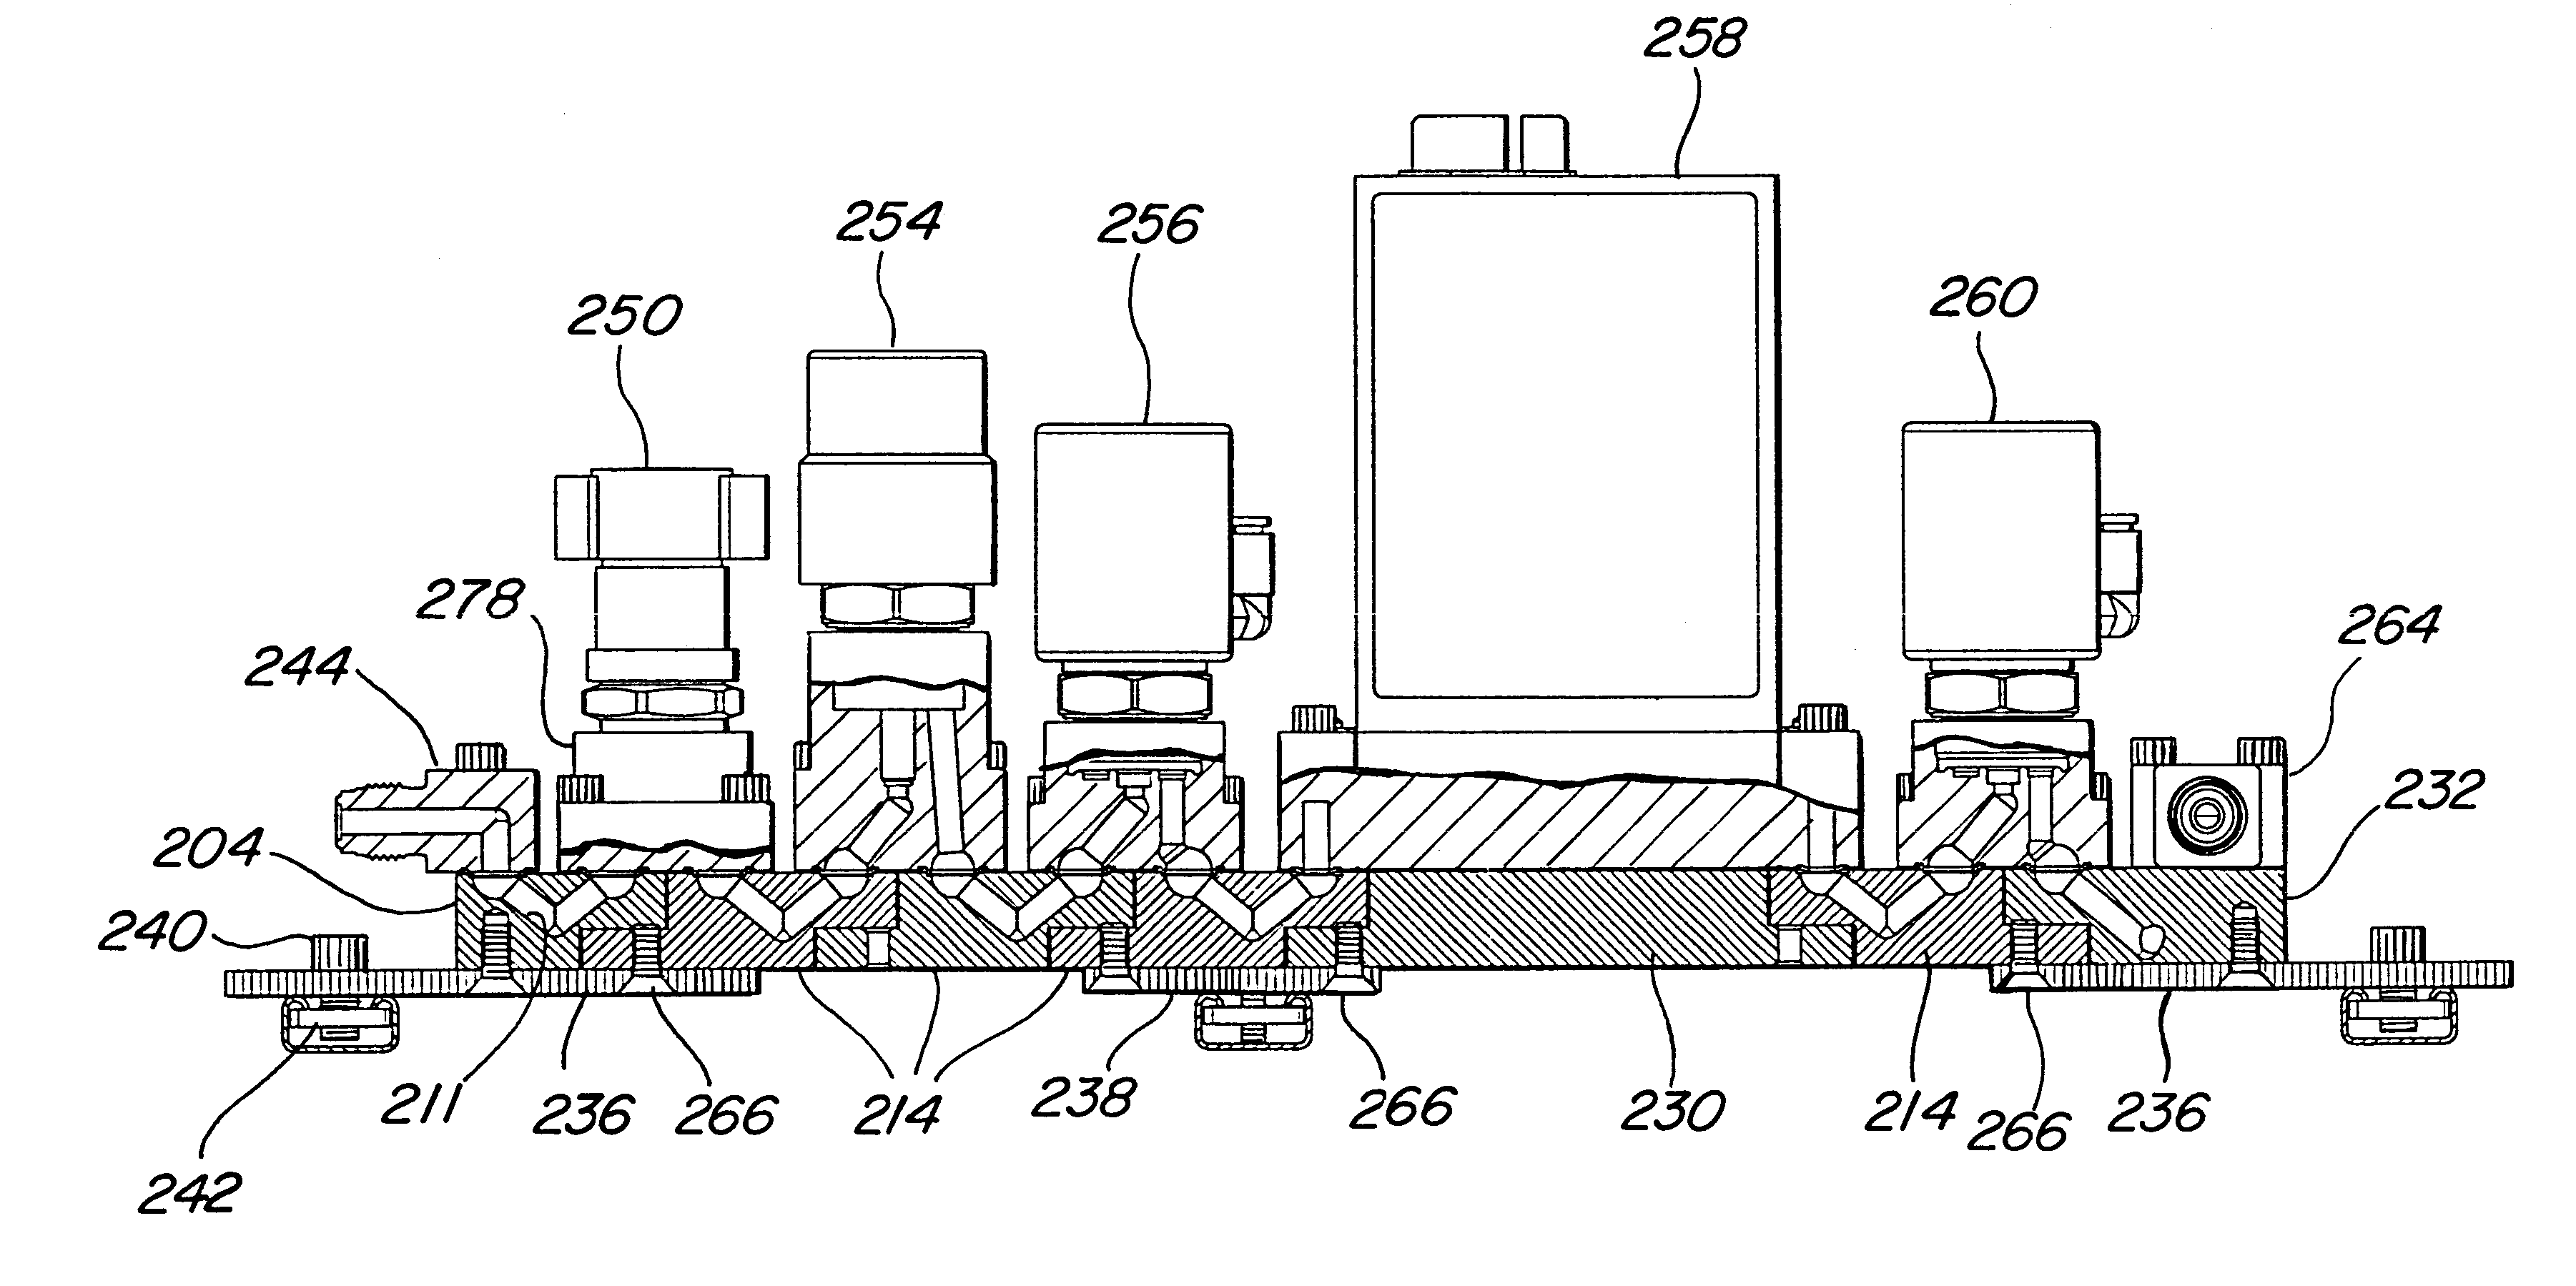 Manifold system of removable components for distribution of fluids